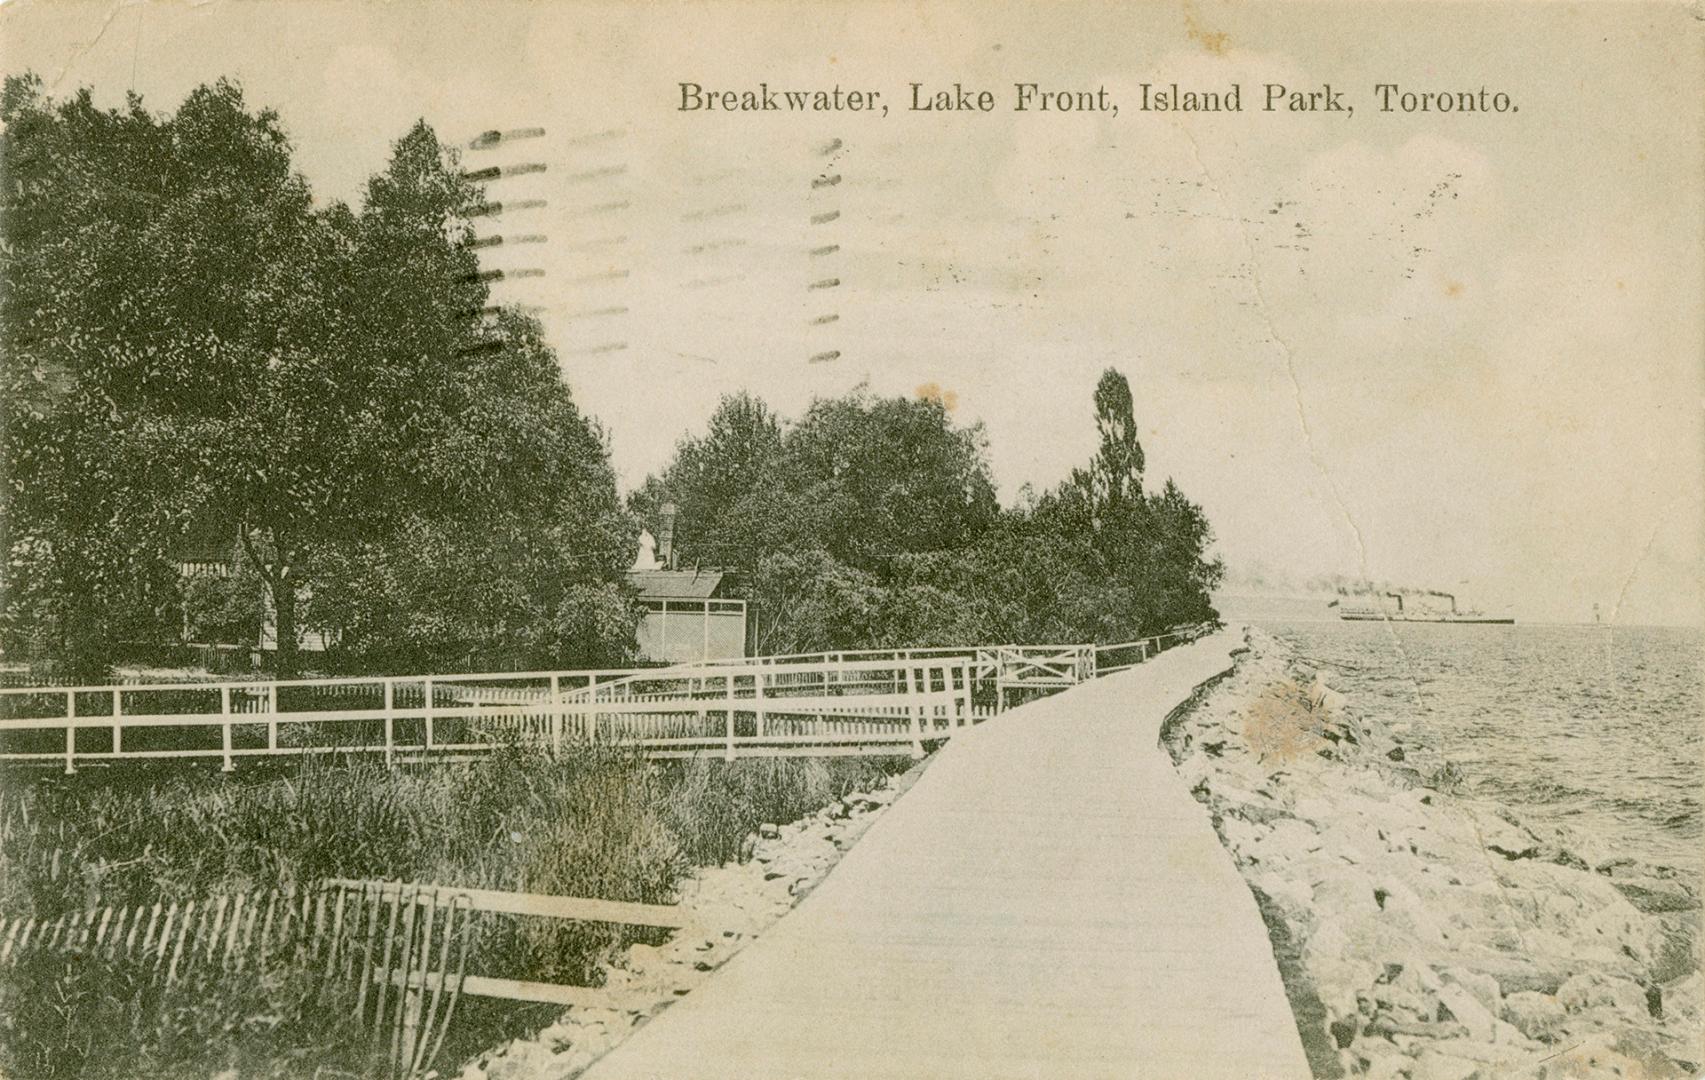 Black and white photograph of a lakefront with a plank boardwalk running along side it.